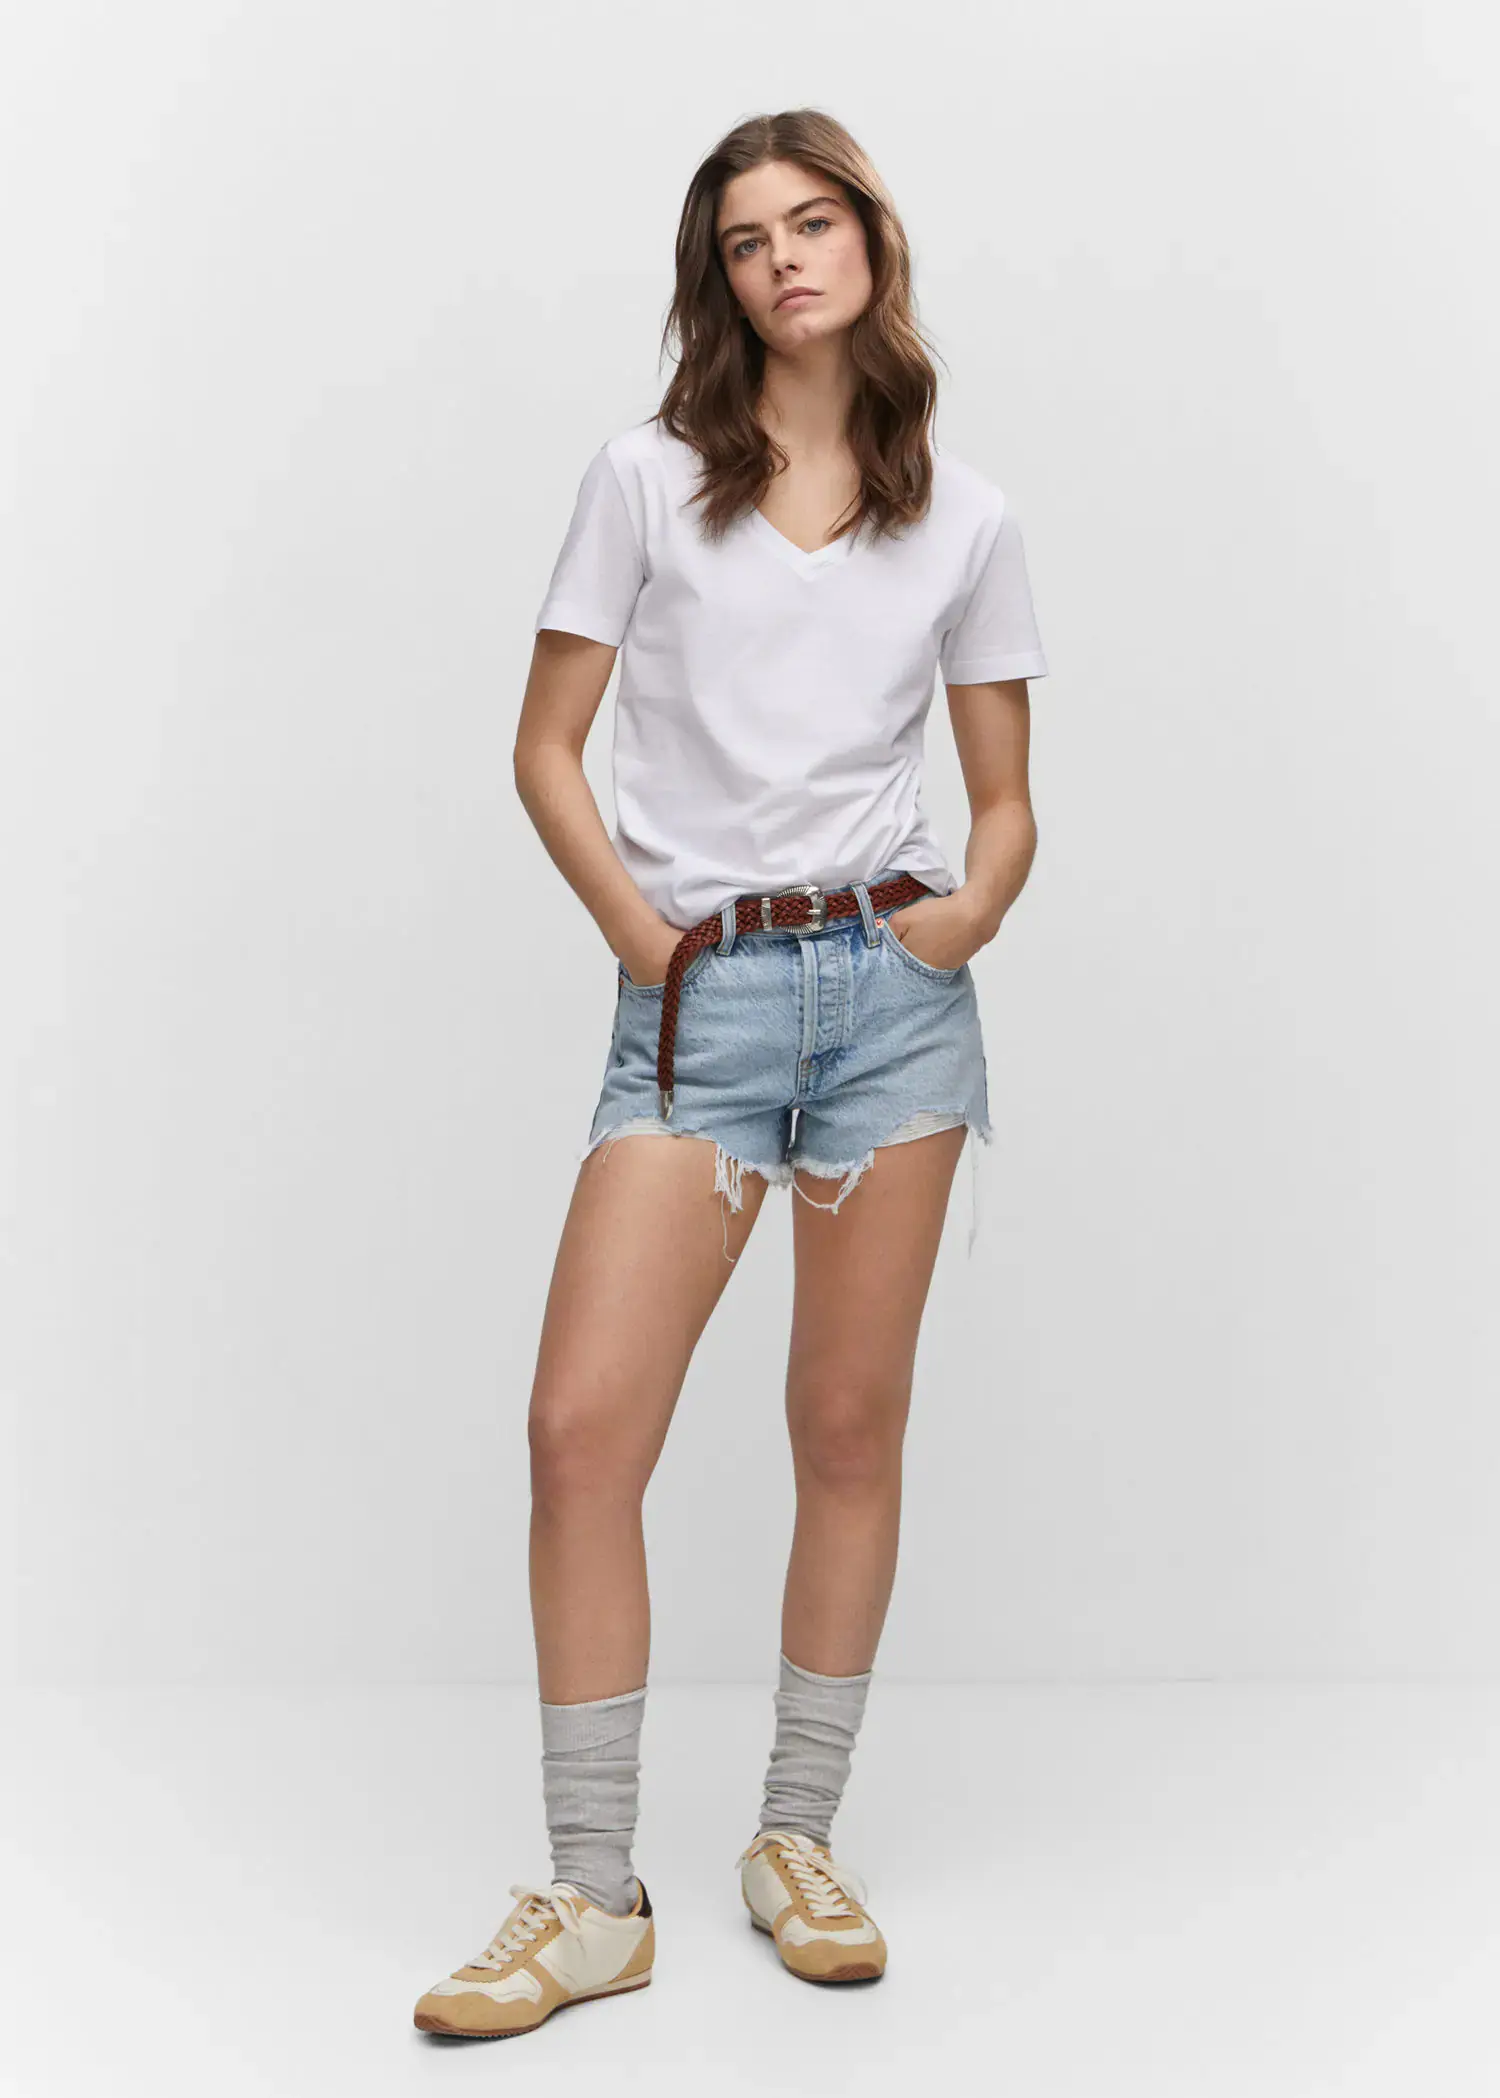 Mango V-neck cotton T-shirt. a woman in white shirt and jeans shorts. 